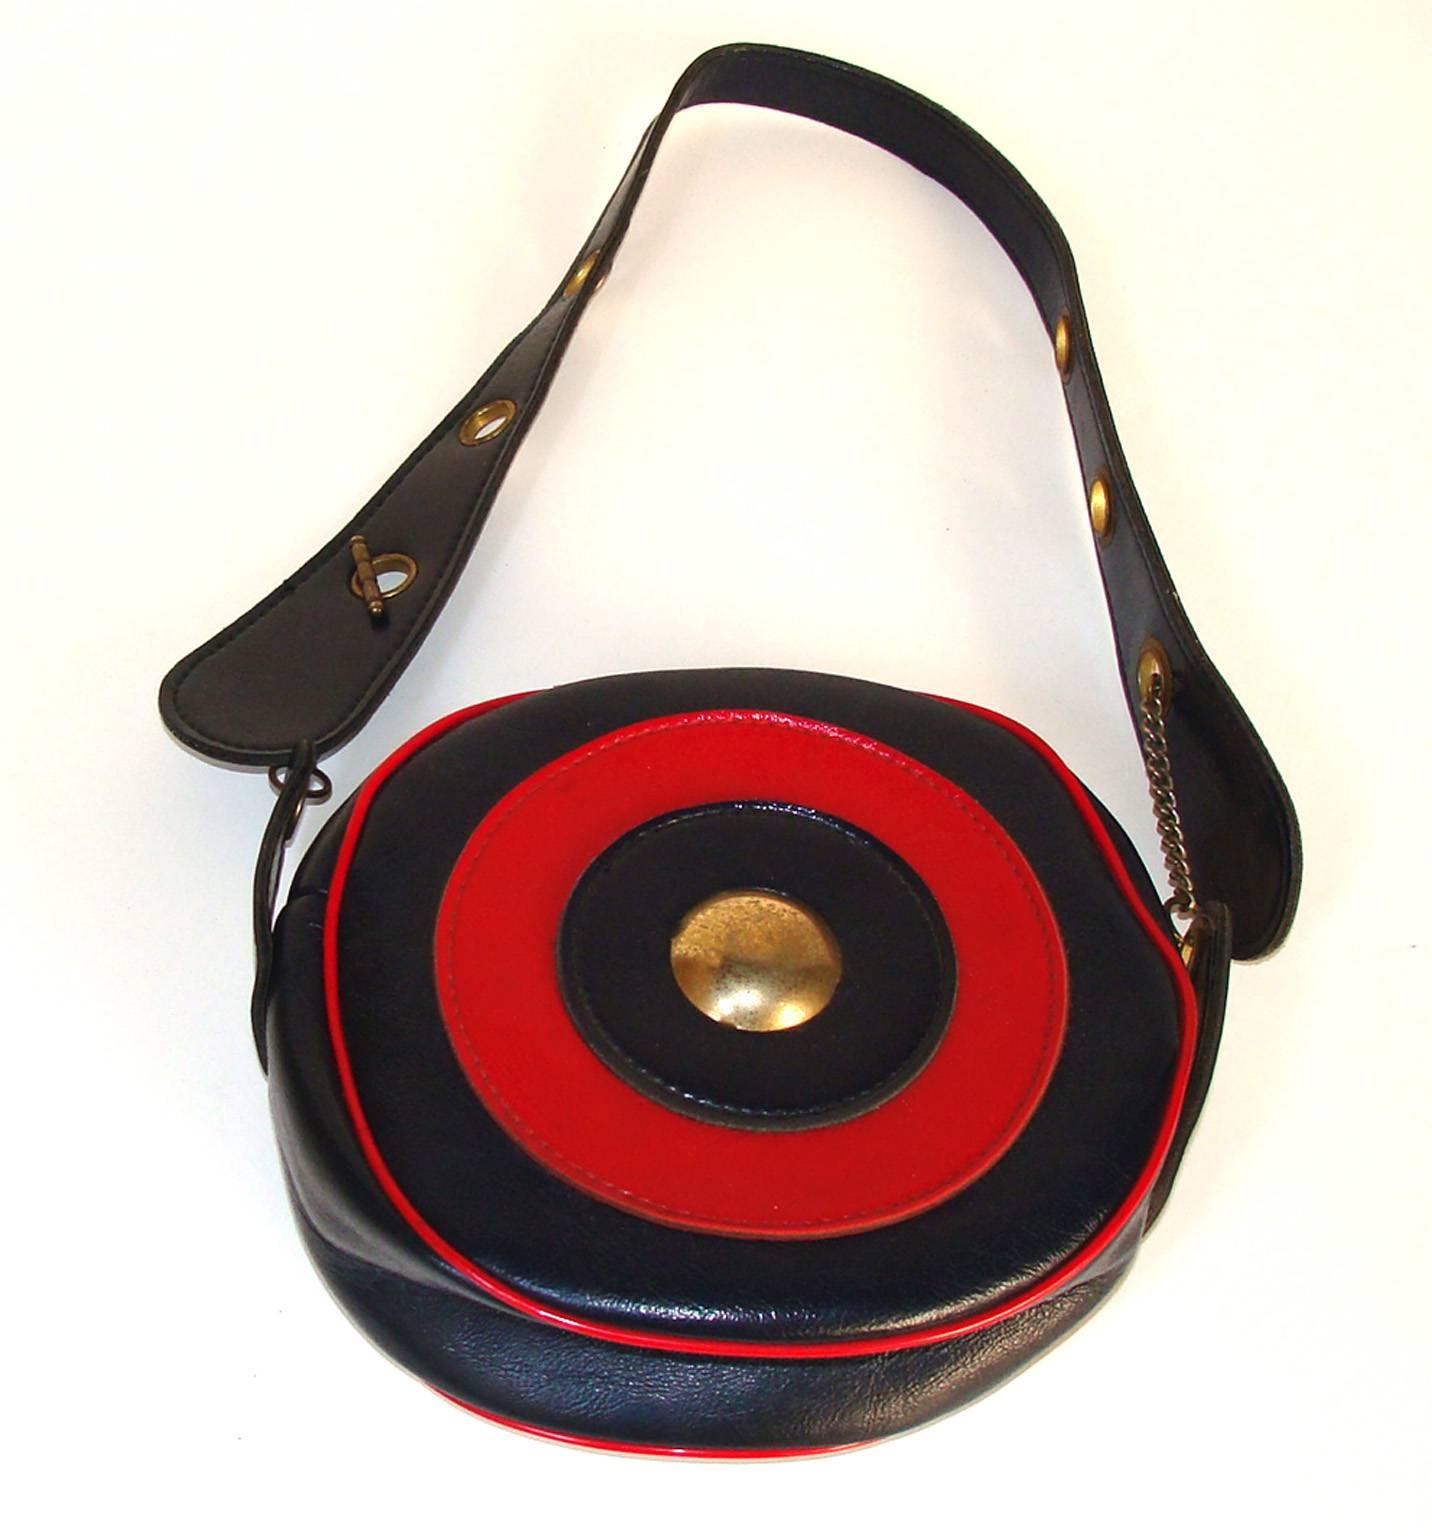 This is great and rare example of 1960's fashion.  A long-time picker brought this to our shop and was not sure we would accept it because it is made of vinyl, not leather.  Well vinyl was the new leather in the 60's and some great fashion bags were